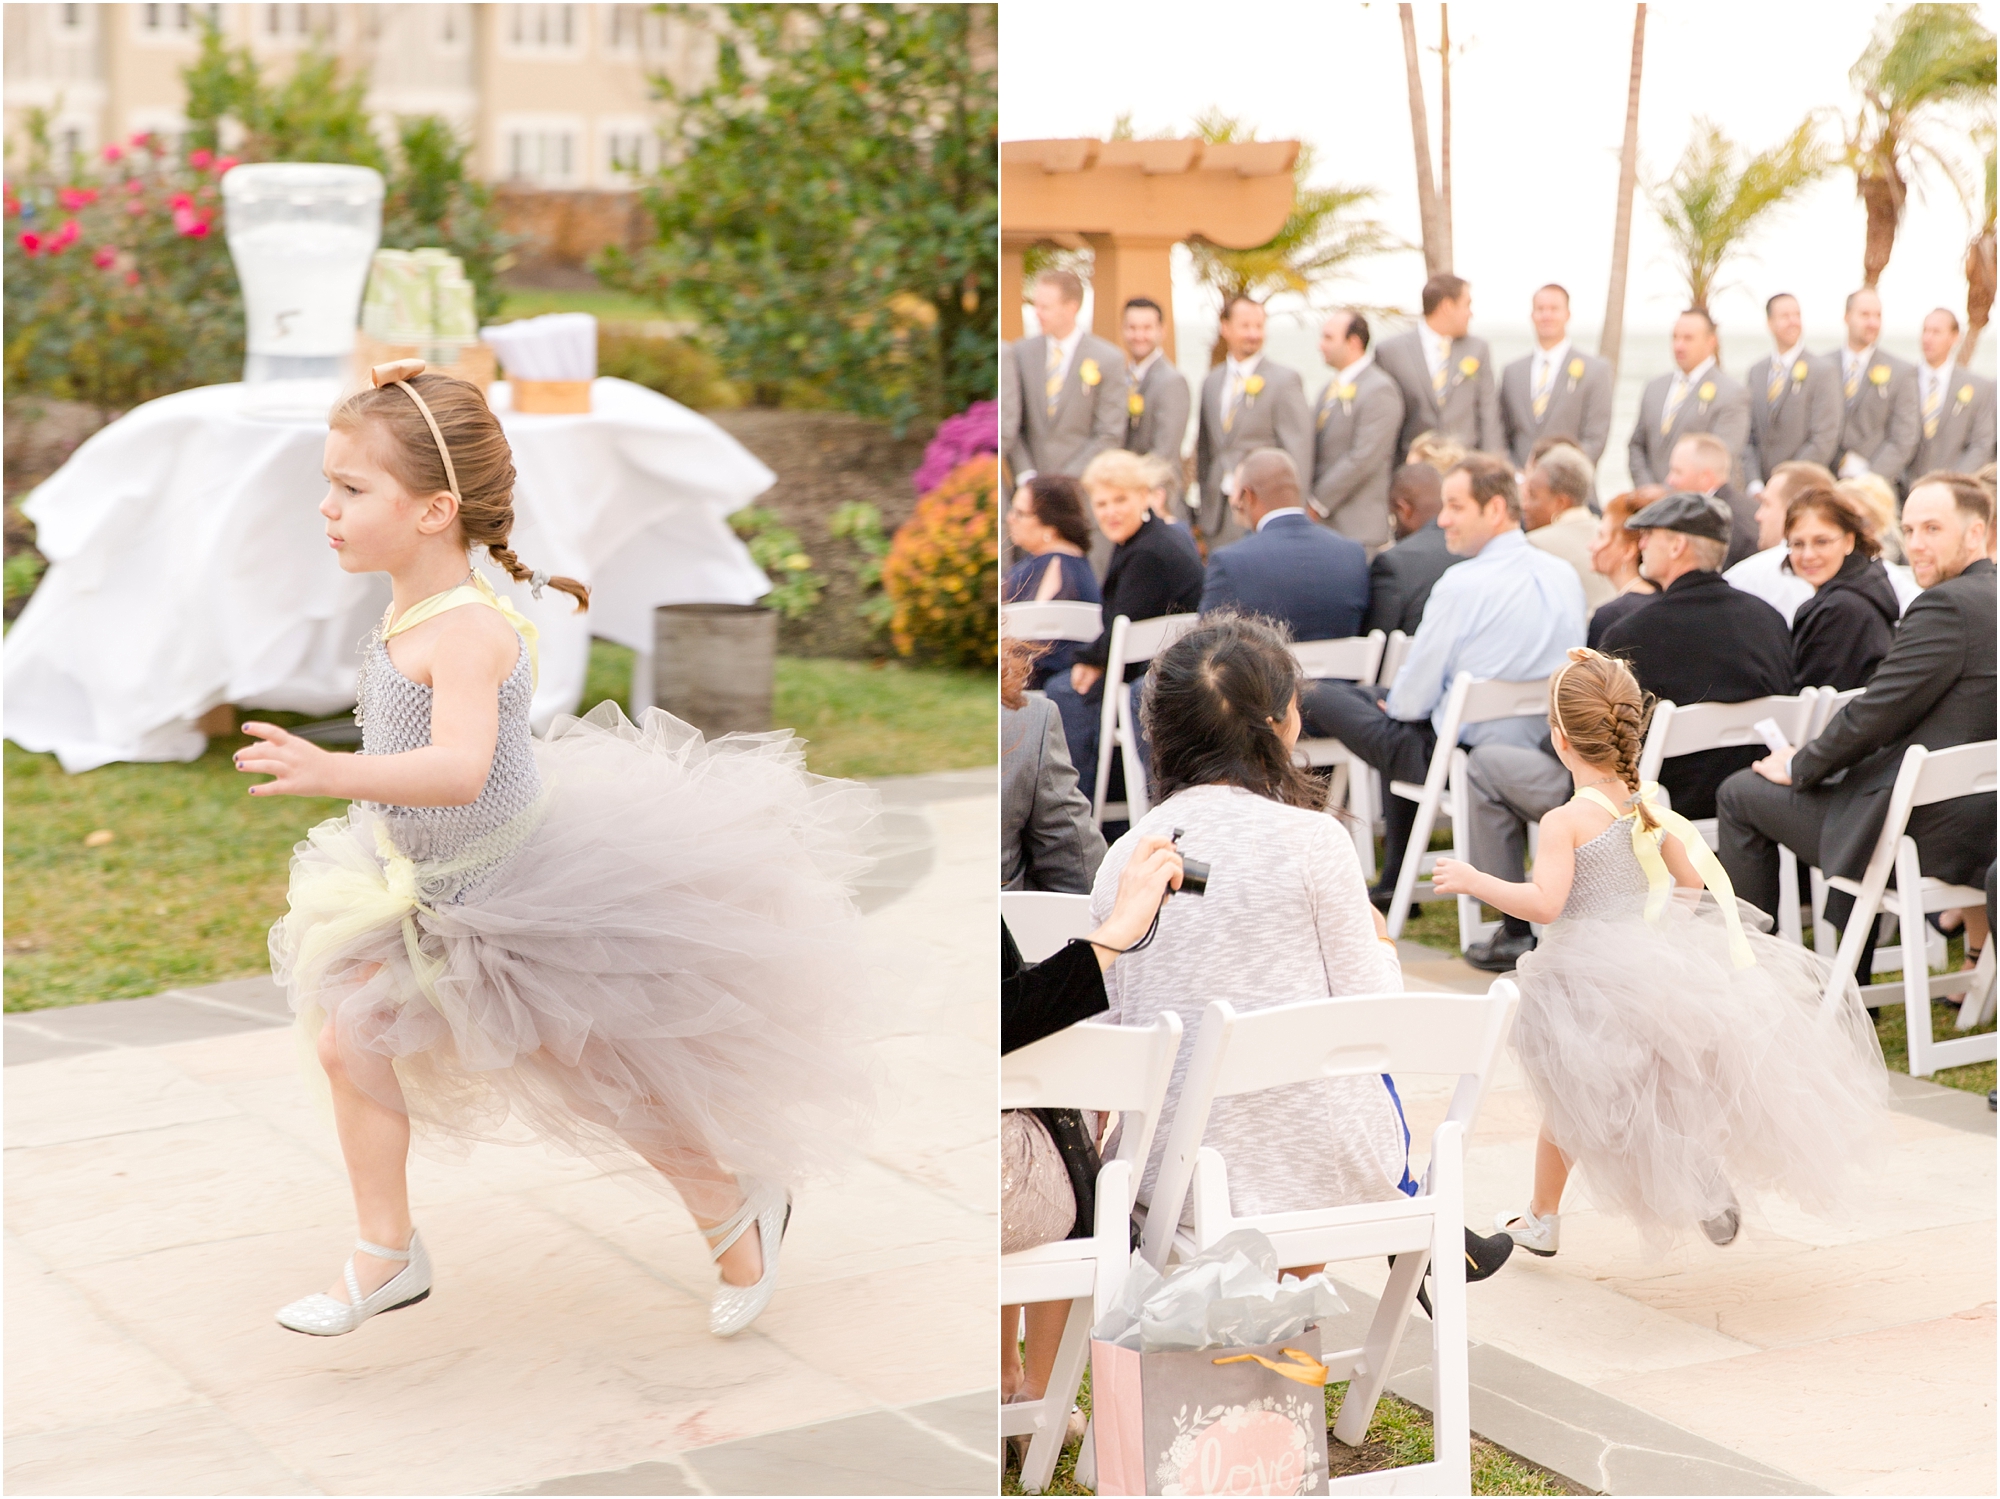  This flower girl was on the move! 